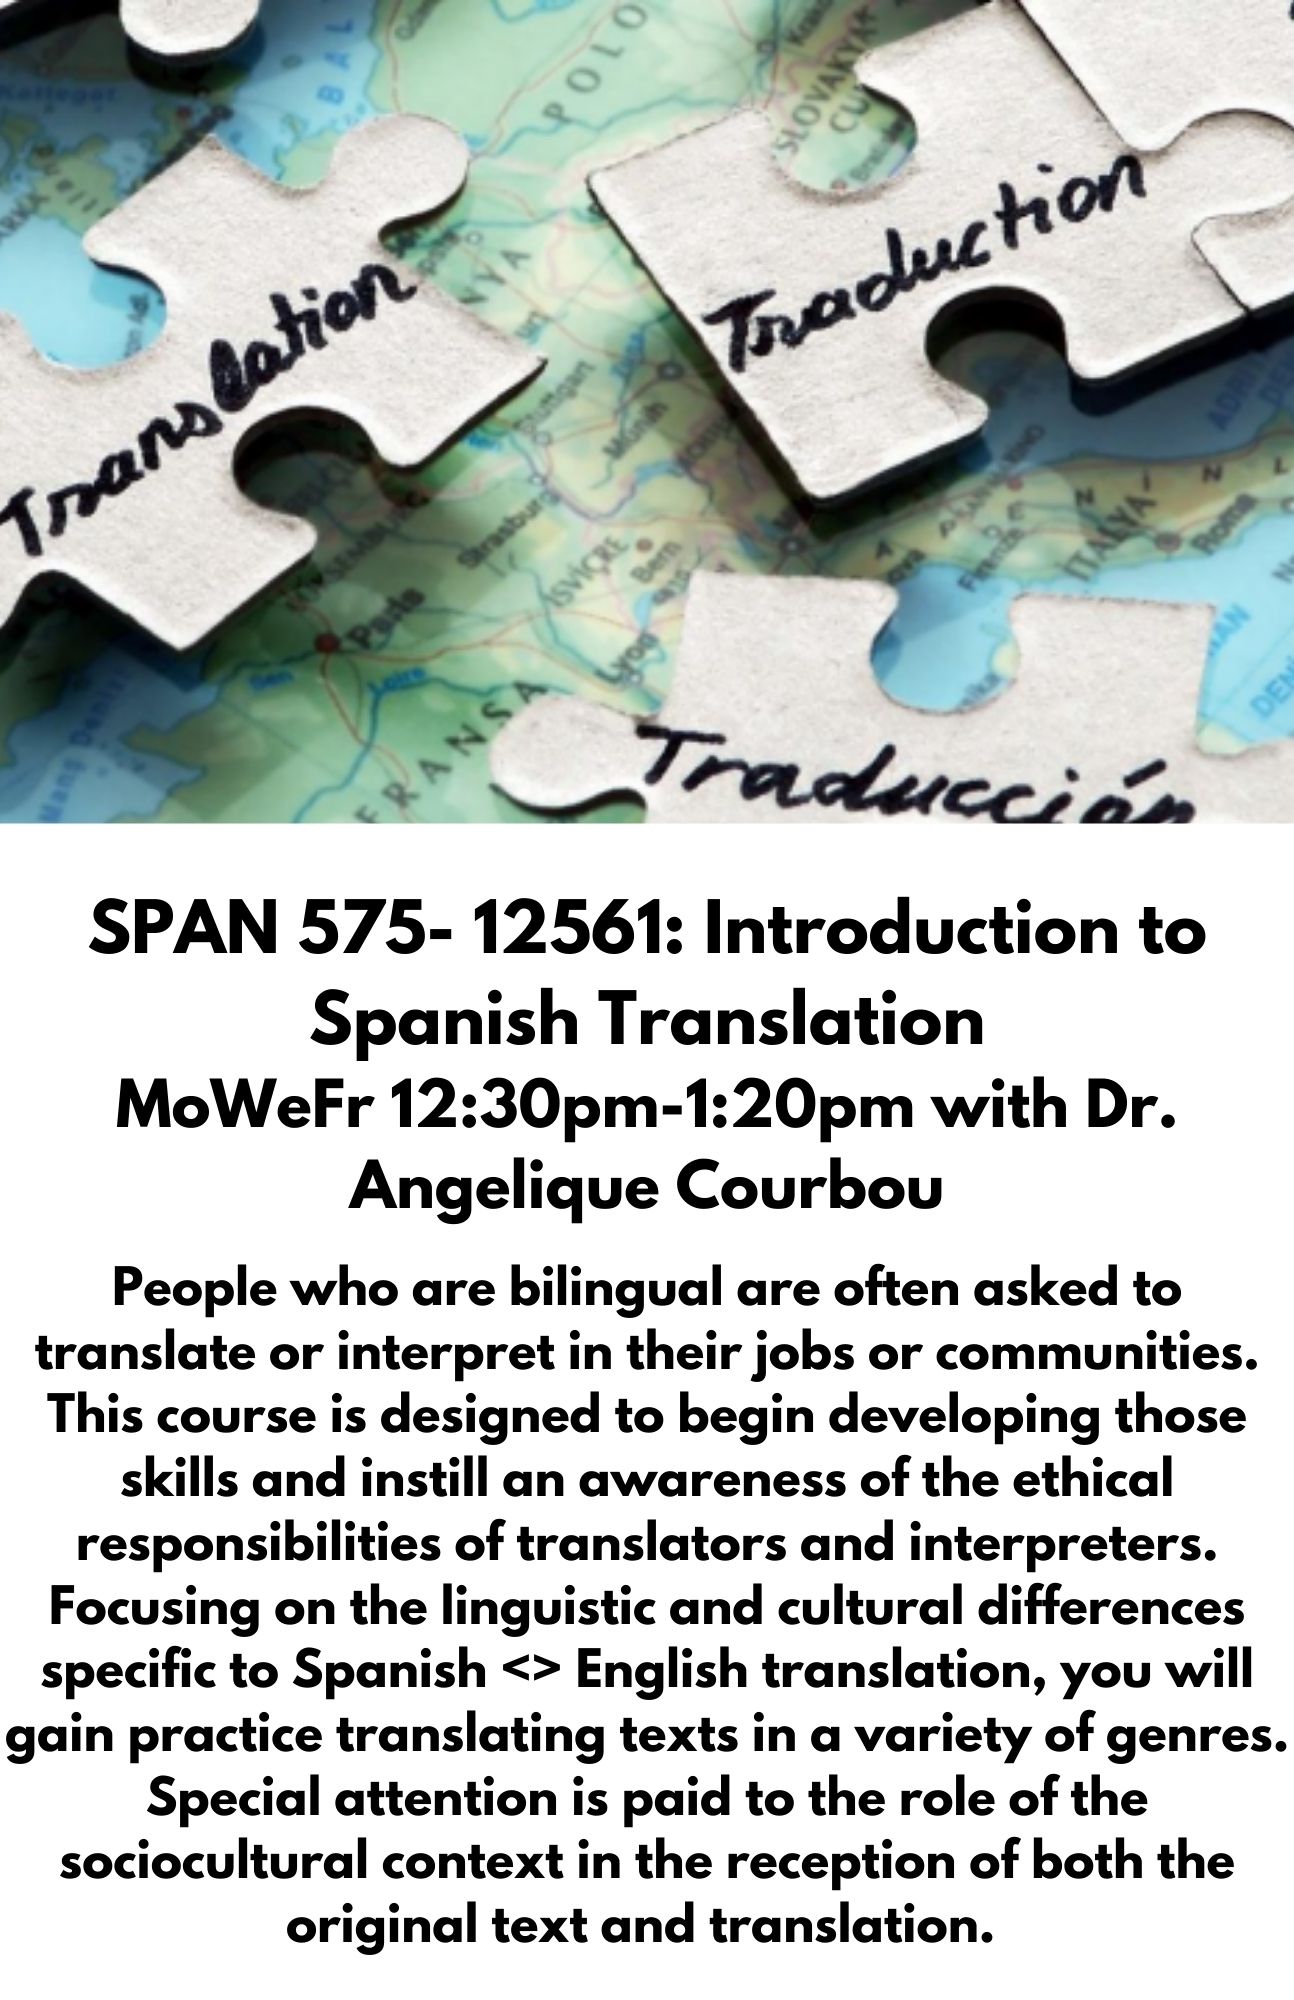 SPAN 575- 12561: Introduction to Spanish Translation MoWeFr 12:30pm-1:20pm with Dr. Angelique Courbou. People who are bilingual are often asked to translate or interpret in their jobs or communities. This course is designed to begin developing those skills and instill an awareness of the ethical responsibilities of translators and interpreters. Focusing on the linguistic and cultural differences specific to Spanish <> English translation, you will gain practice translating texts in a variety of genres. Special attention is paid to the role of the sociocultural context in the reception of both the original text and translation. 